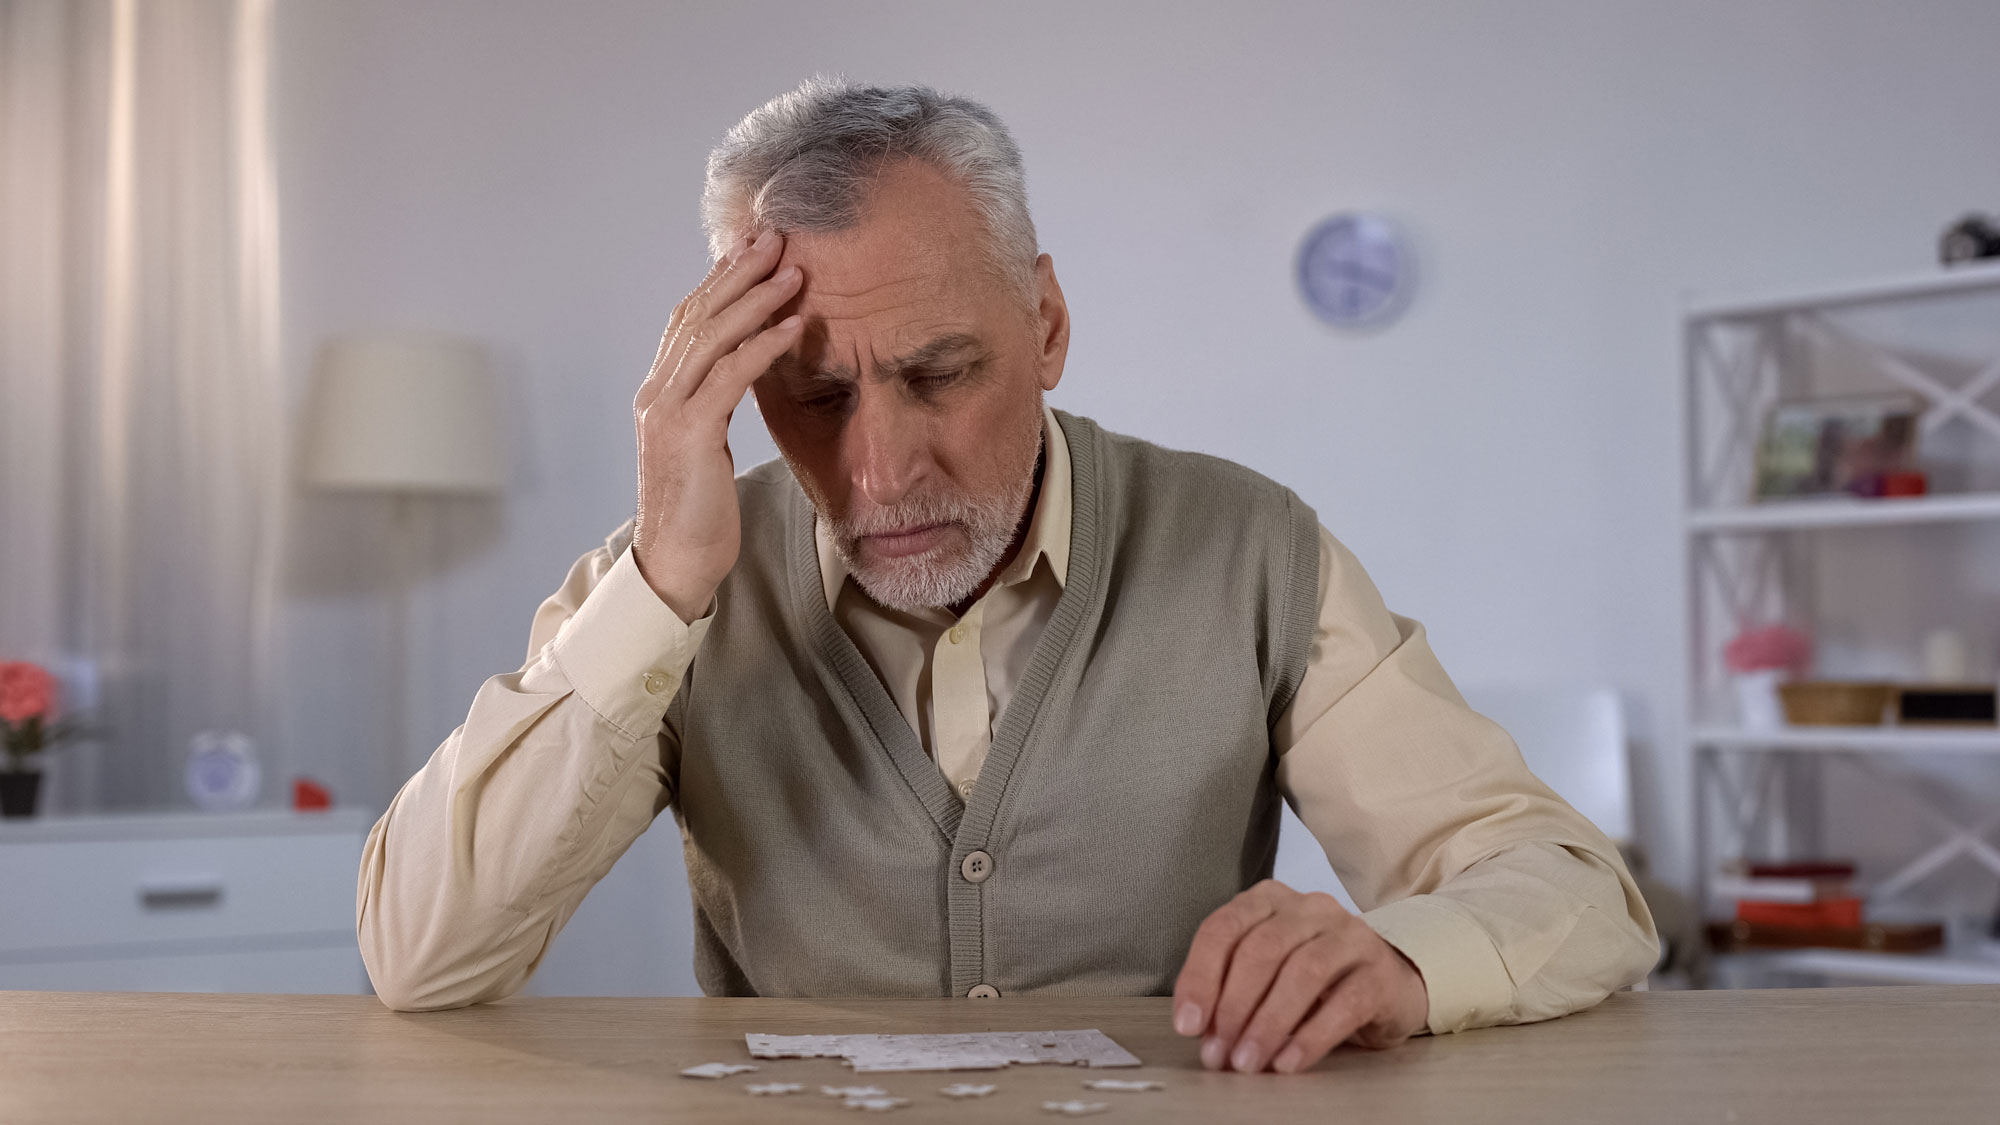 a senior man places hand on head while completing a puzzle